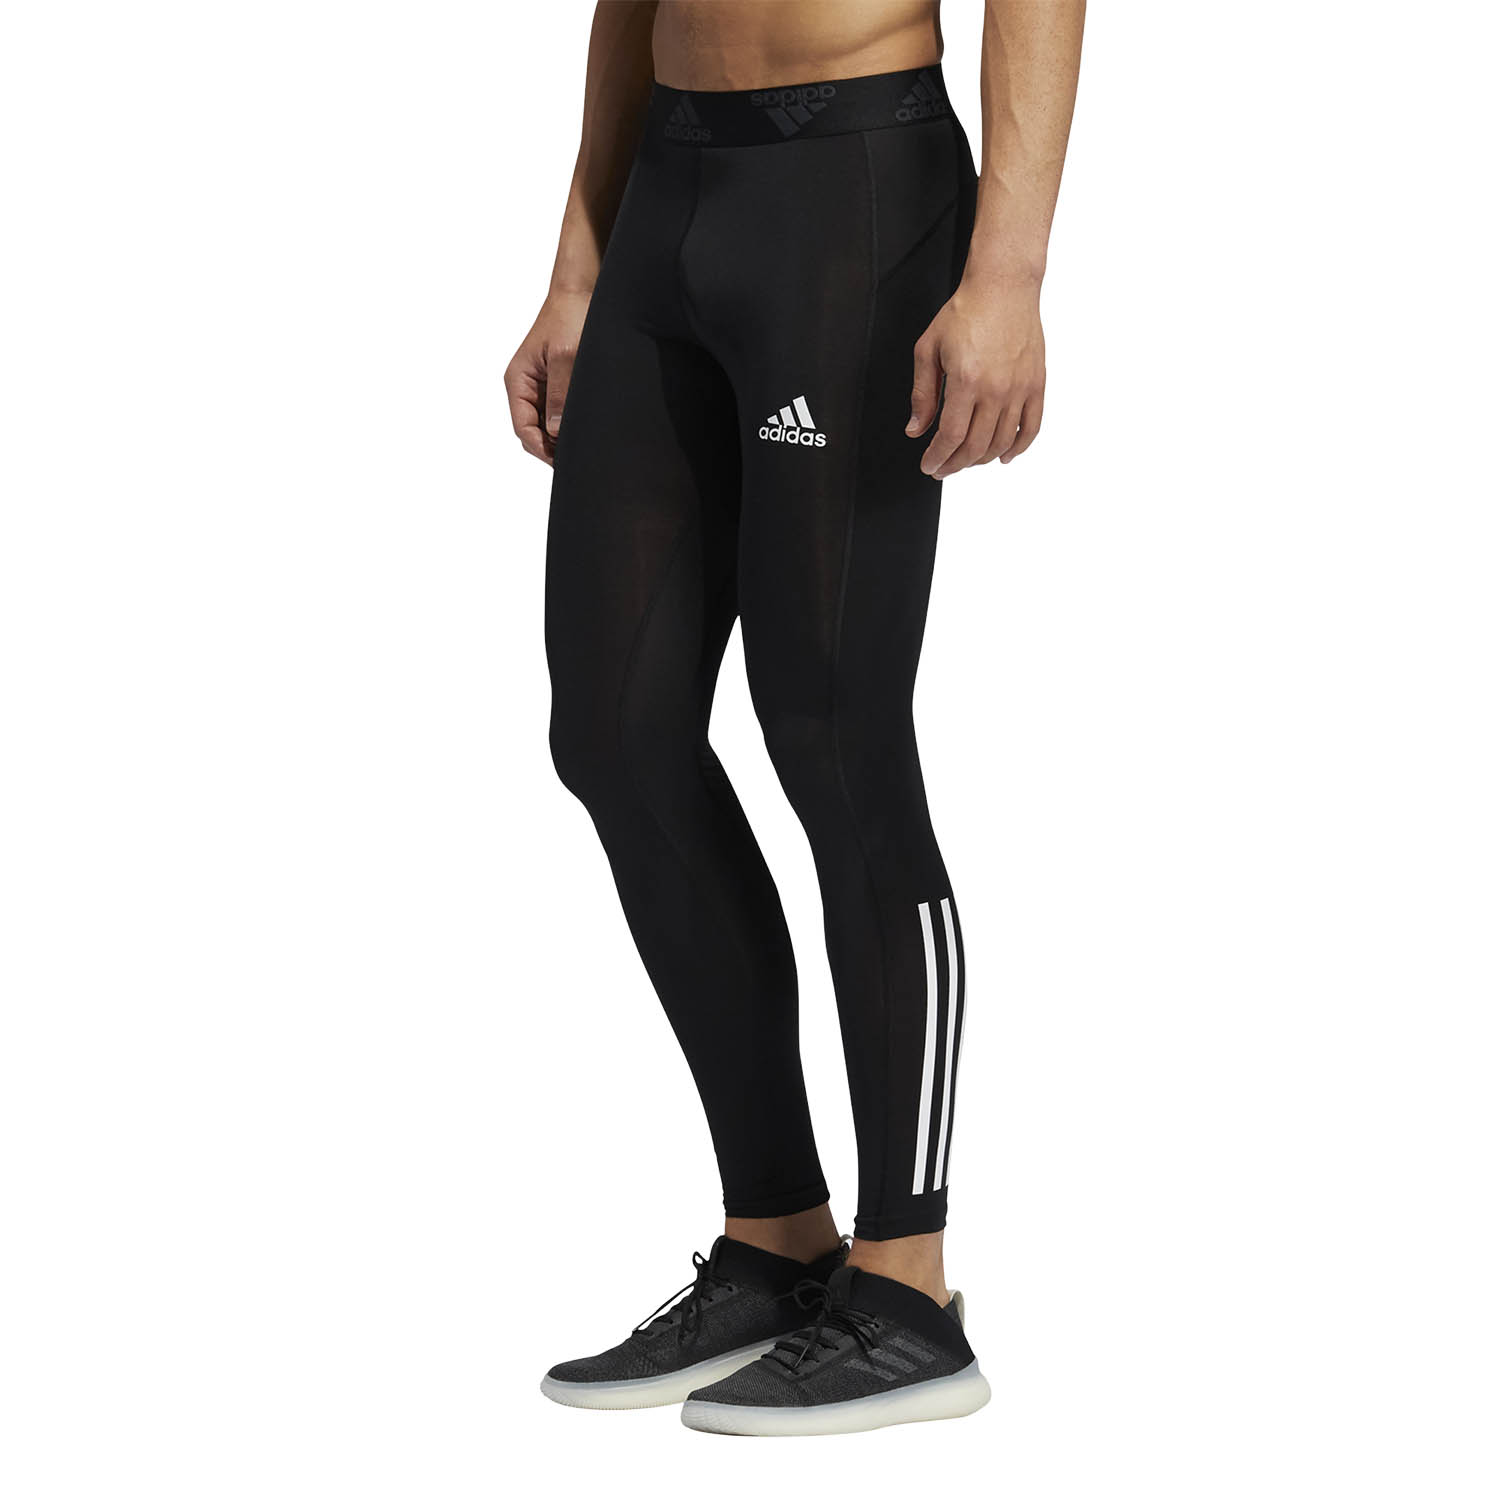 Youth Embed Employer adidas Techfit 3 Stripes Men's Training Tights - Black